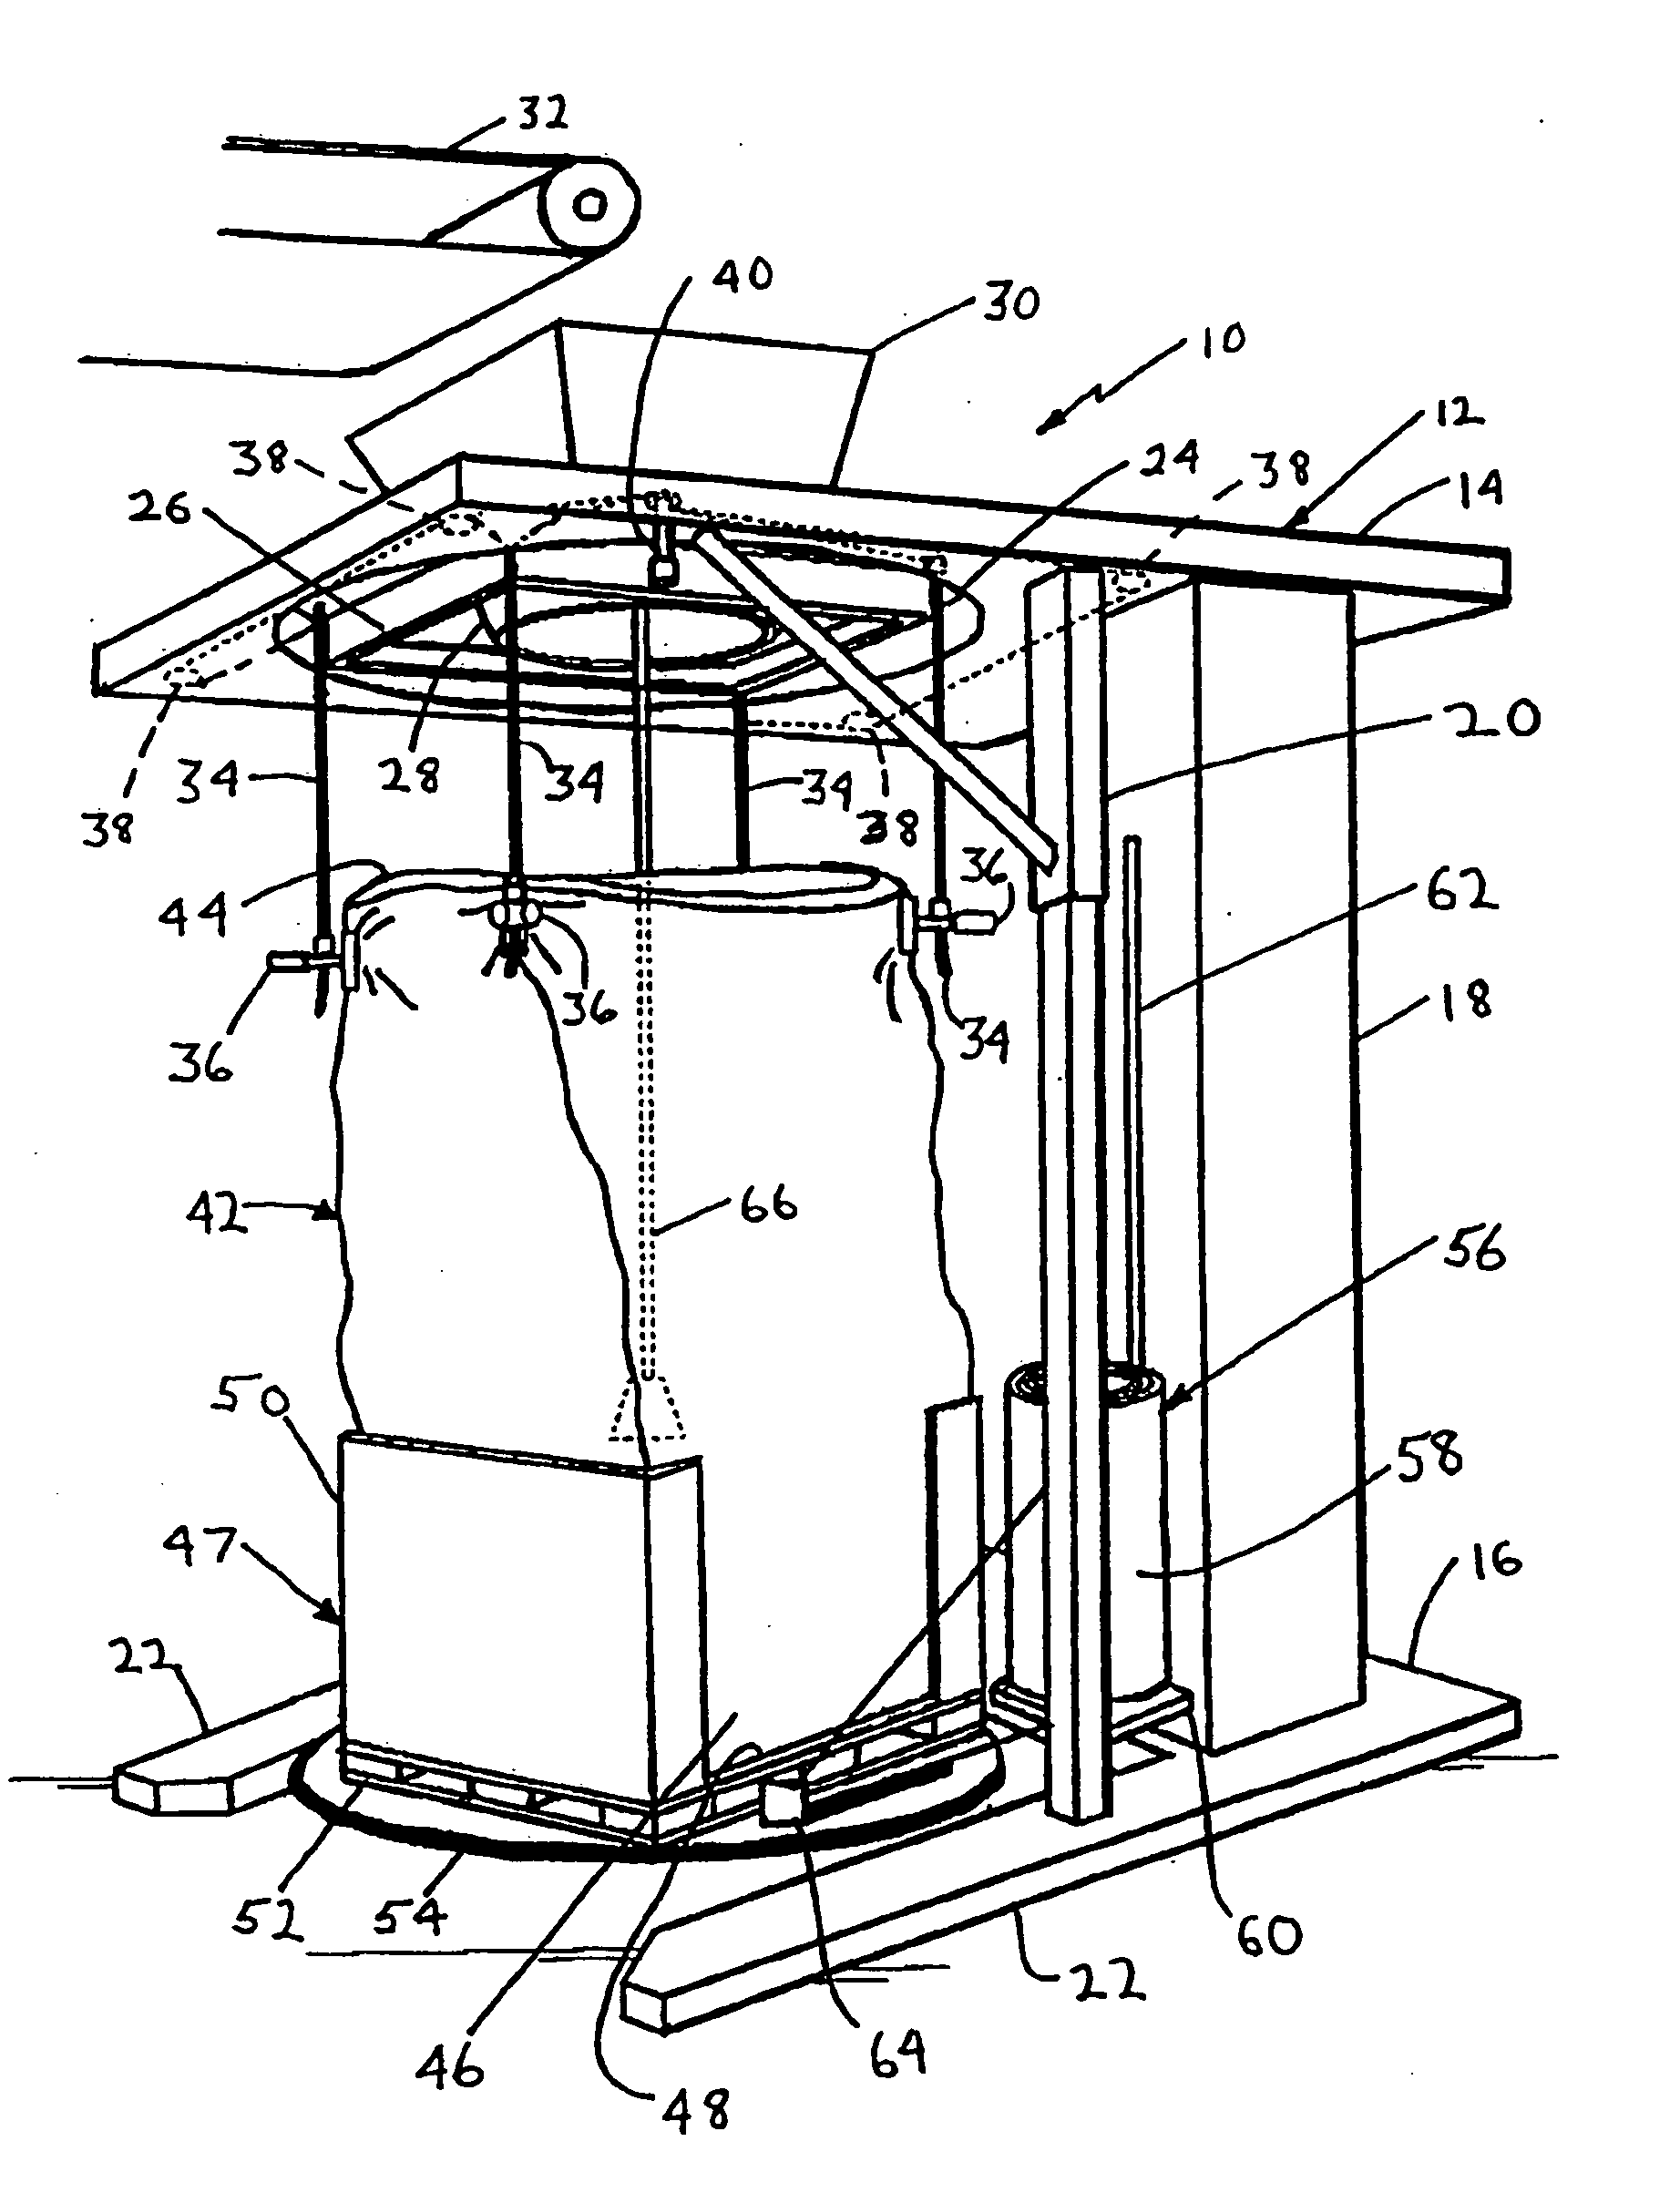 Method for forming a transportable container for bulk goods